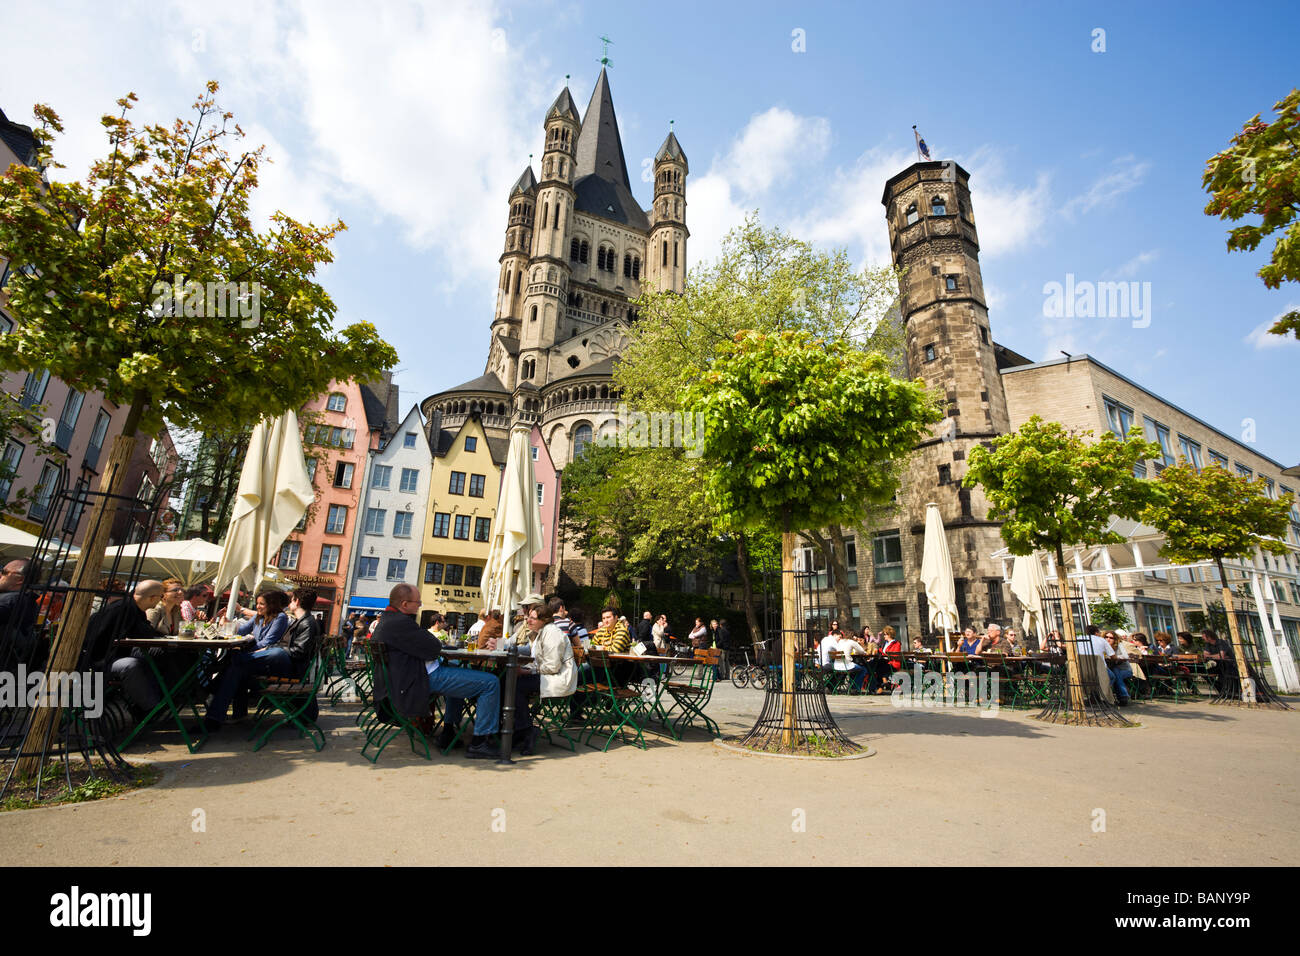 Biergarten at Cologne Old Town, church Saint Martin in background Stock Photo